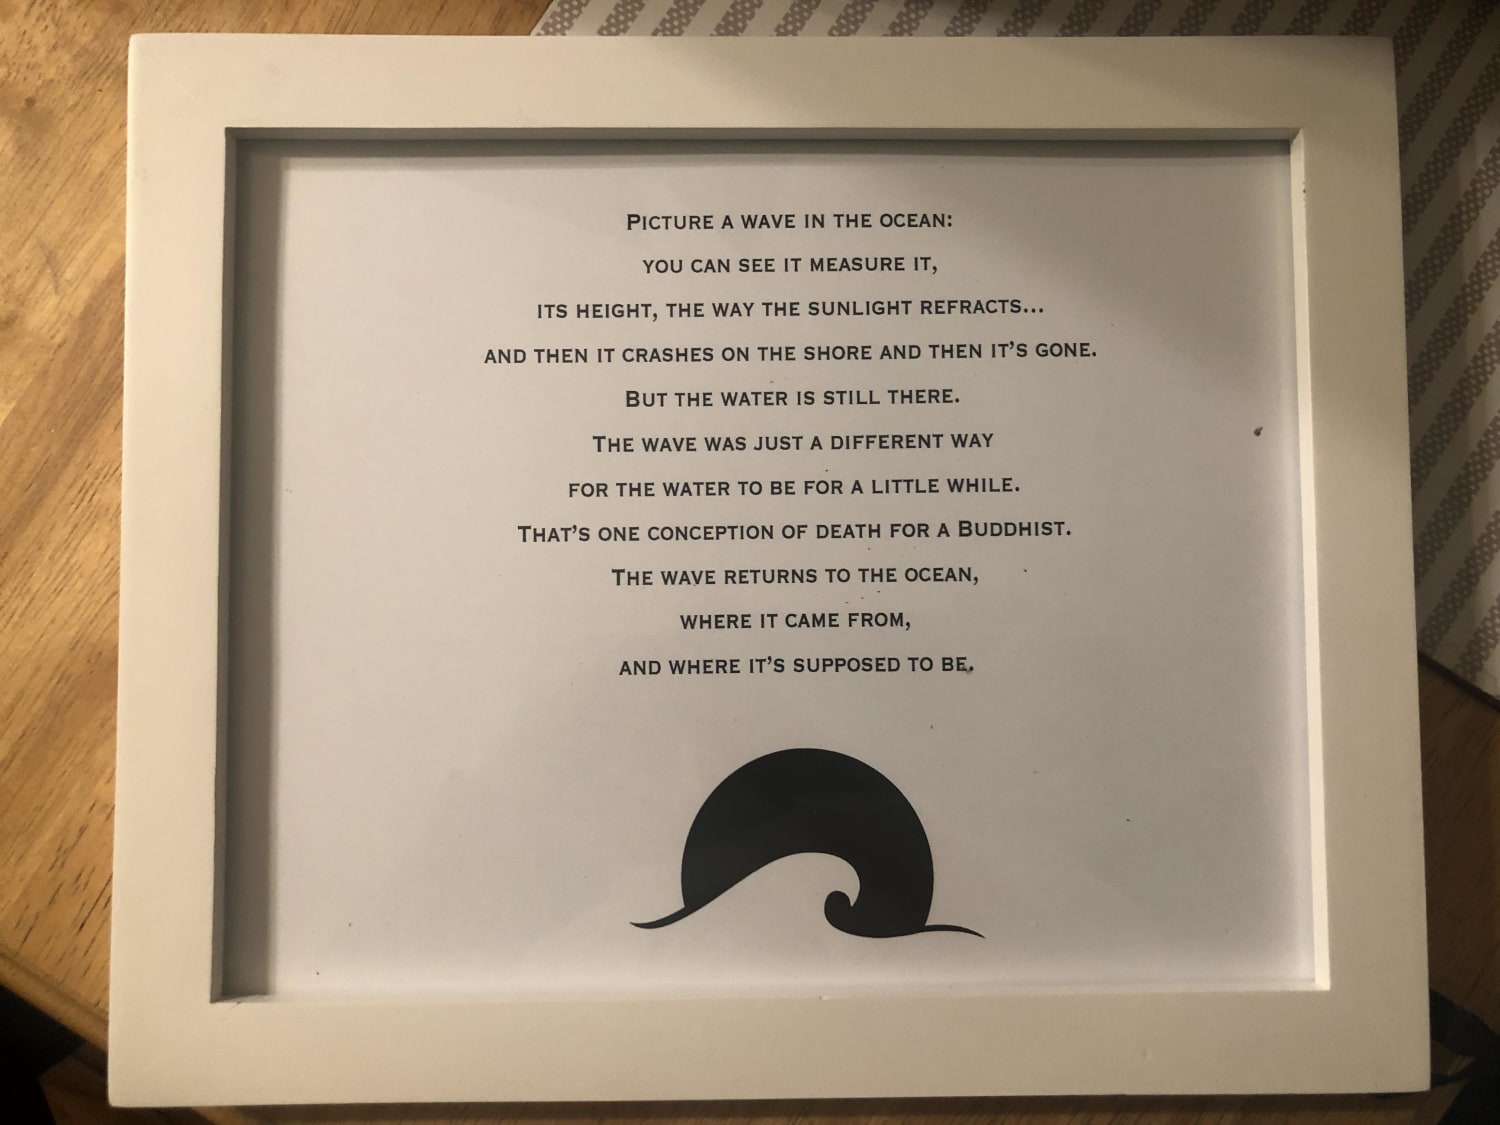 I bought this and framed it for my friend’s birthday tomorrow. He loves the show too and we bonded a bit over it.